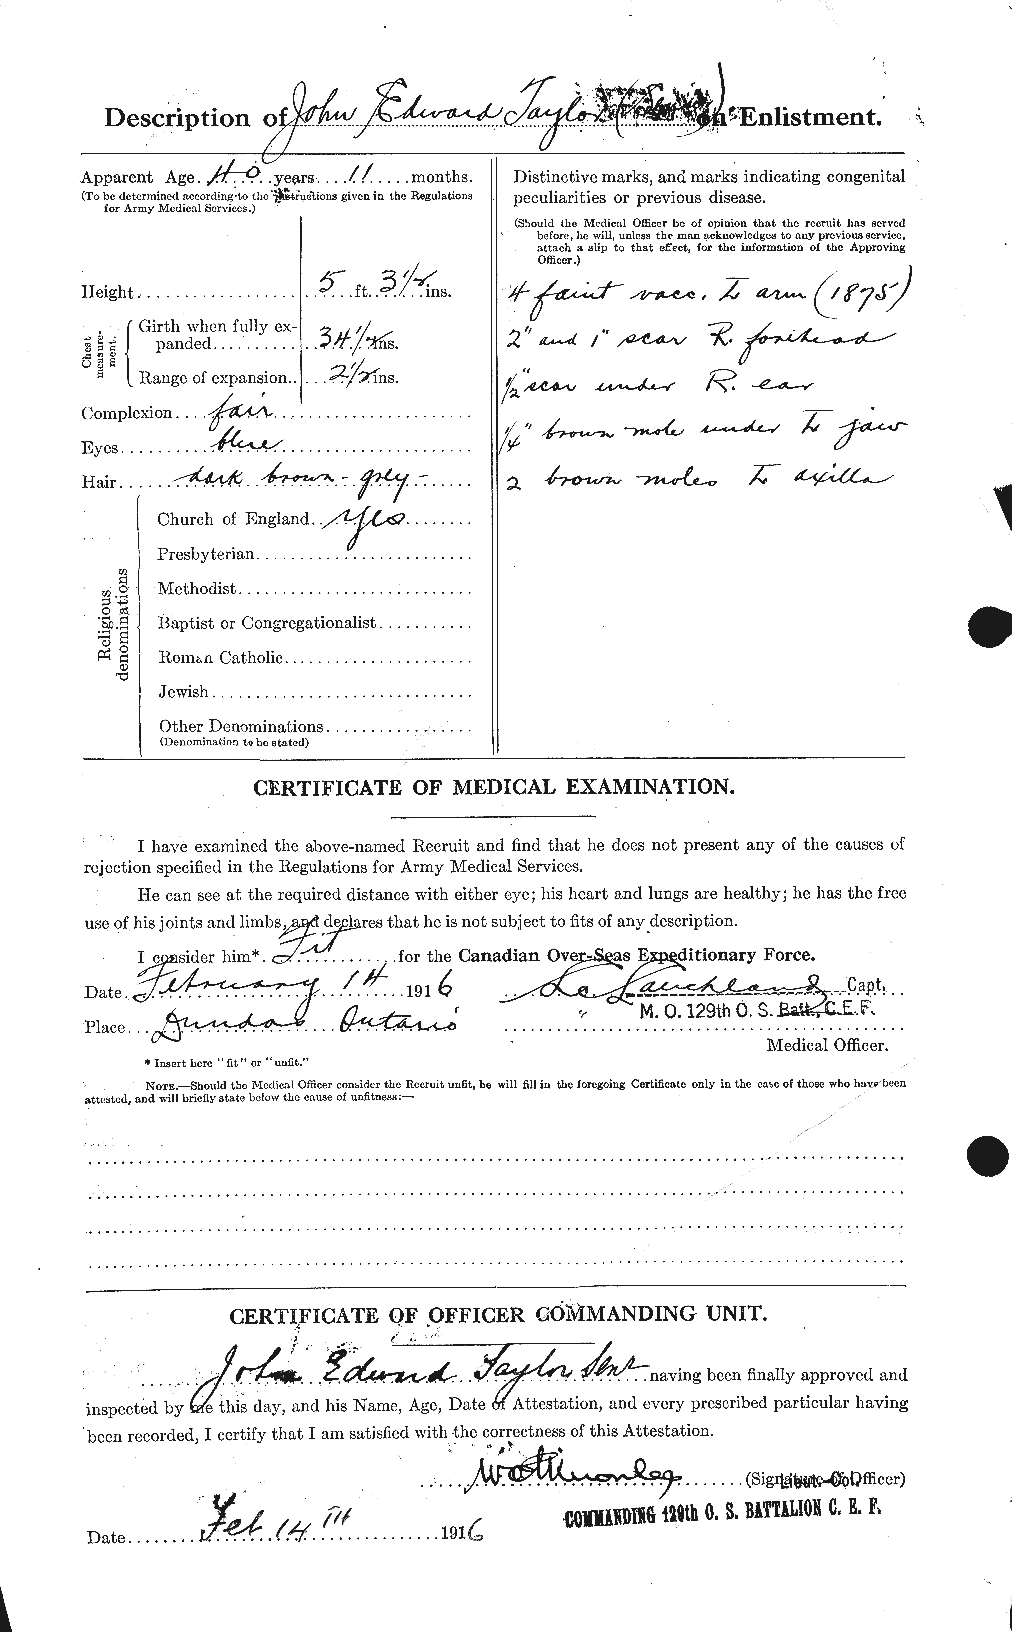 Personnel Records of the First World War - CEF 627073b